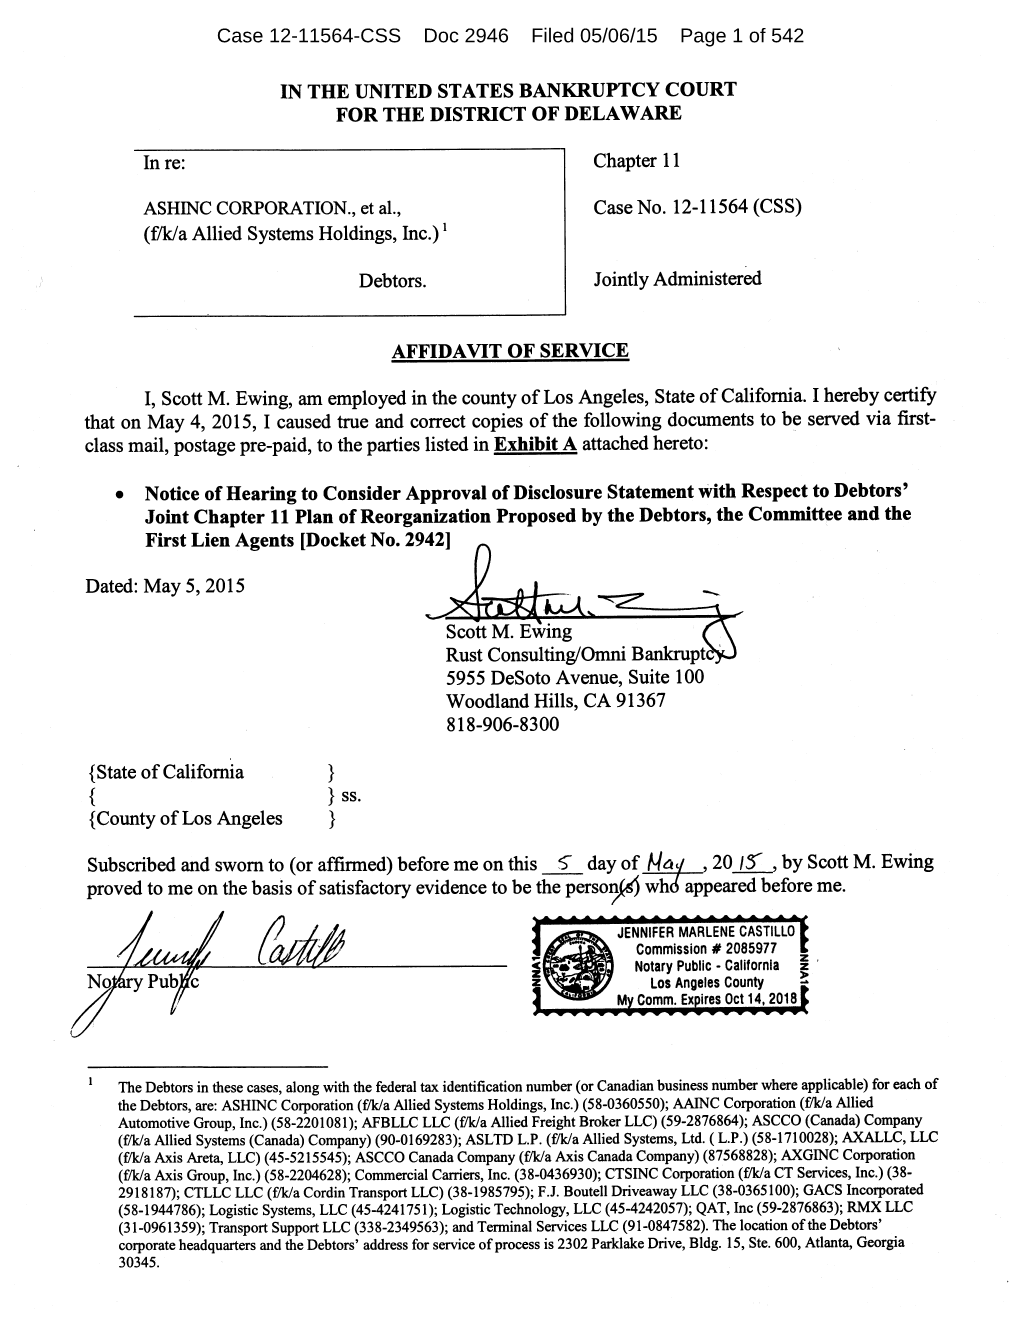 Case 12-11564-CSS Doc 2946 Filed 05/06/15 Page 1 of 542 Case 12-11564-CSS Doc 2946 Filed 05/06/15 Page 2 of 542 Allied Systems Holdings, Inc.Case - U.S